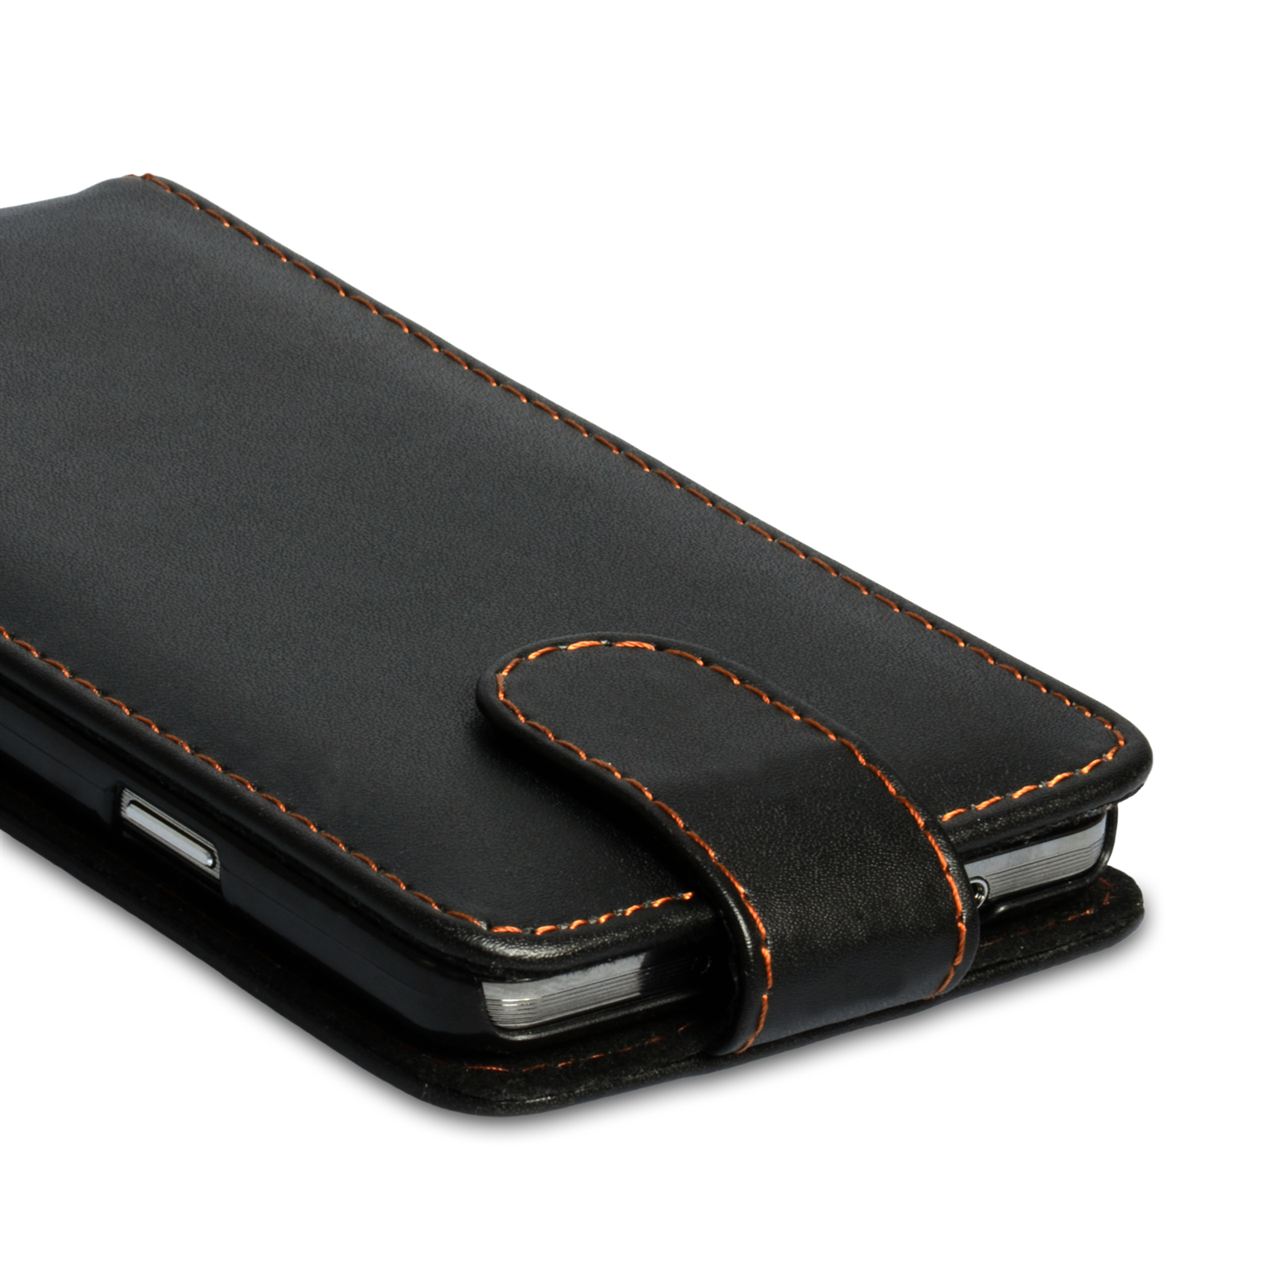 YouSave Samsung Galaxy Note 3 Leather Effect Flip Case - Black